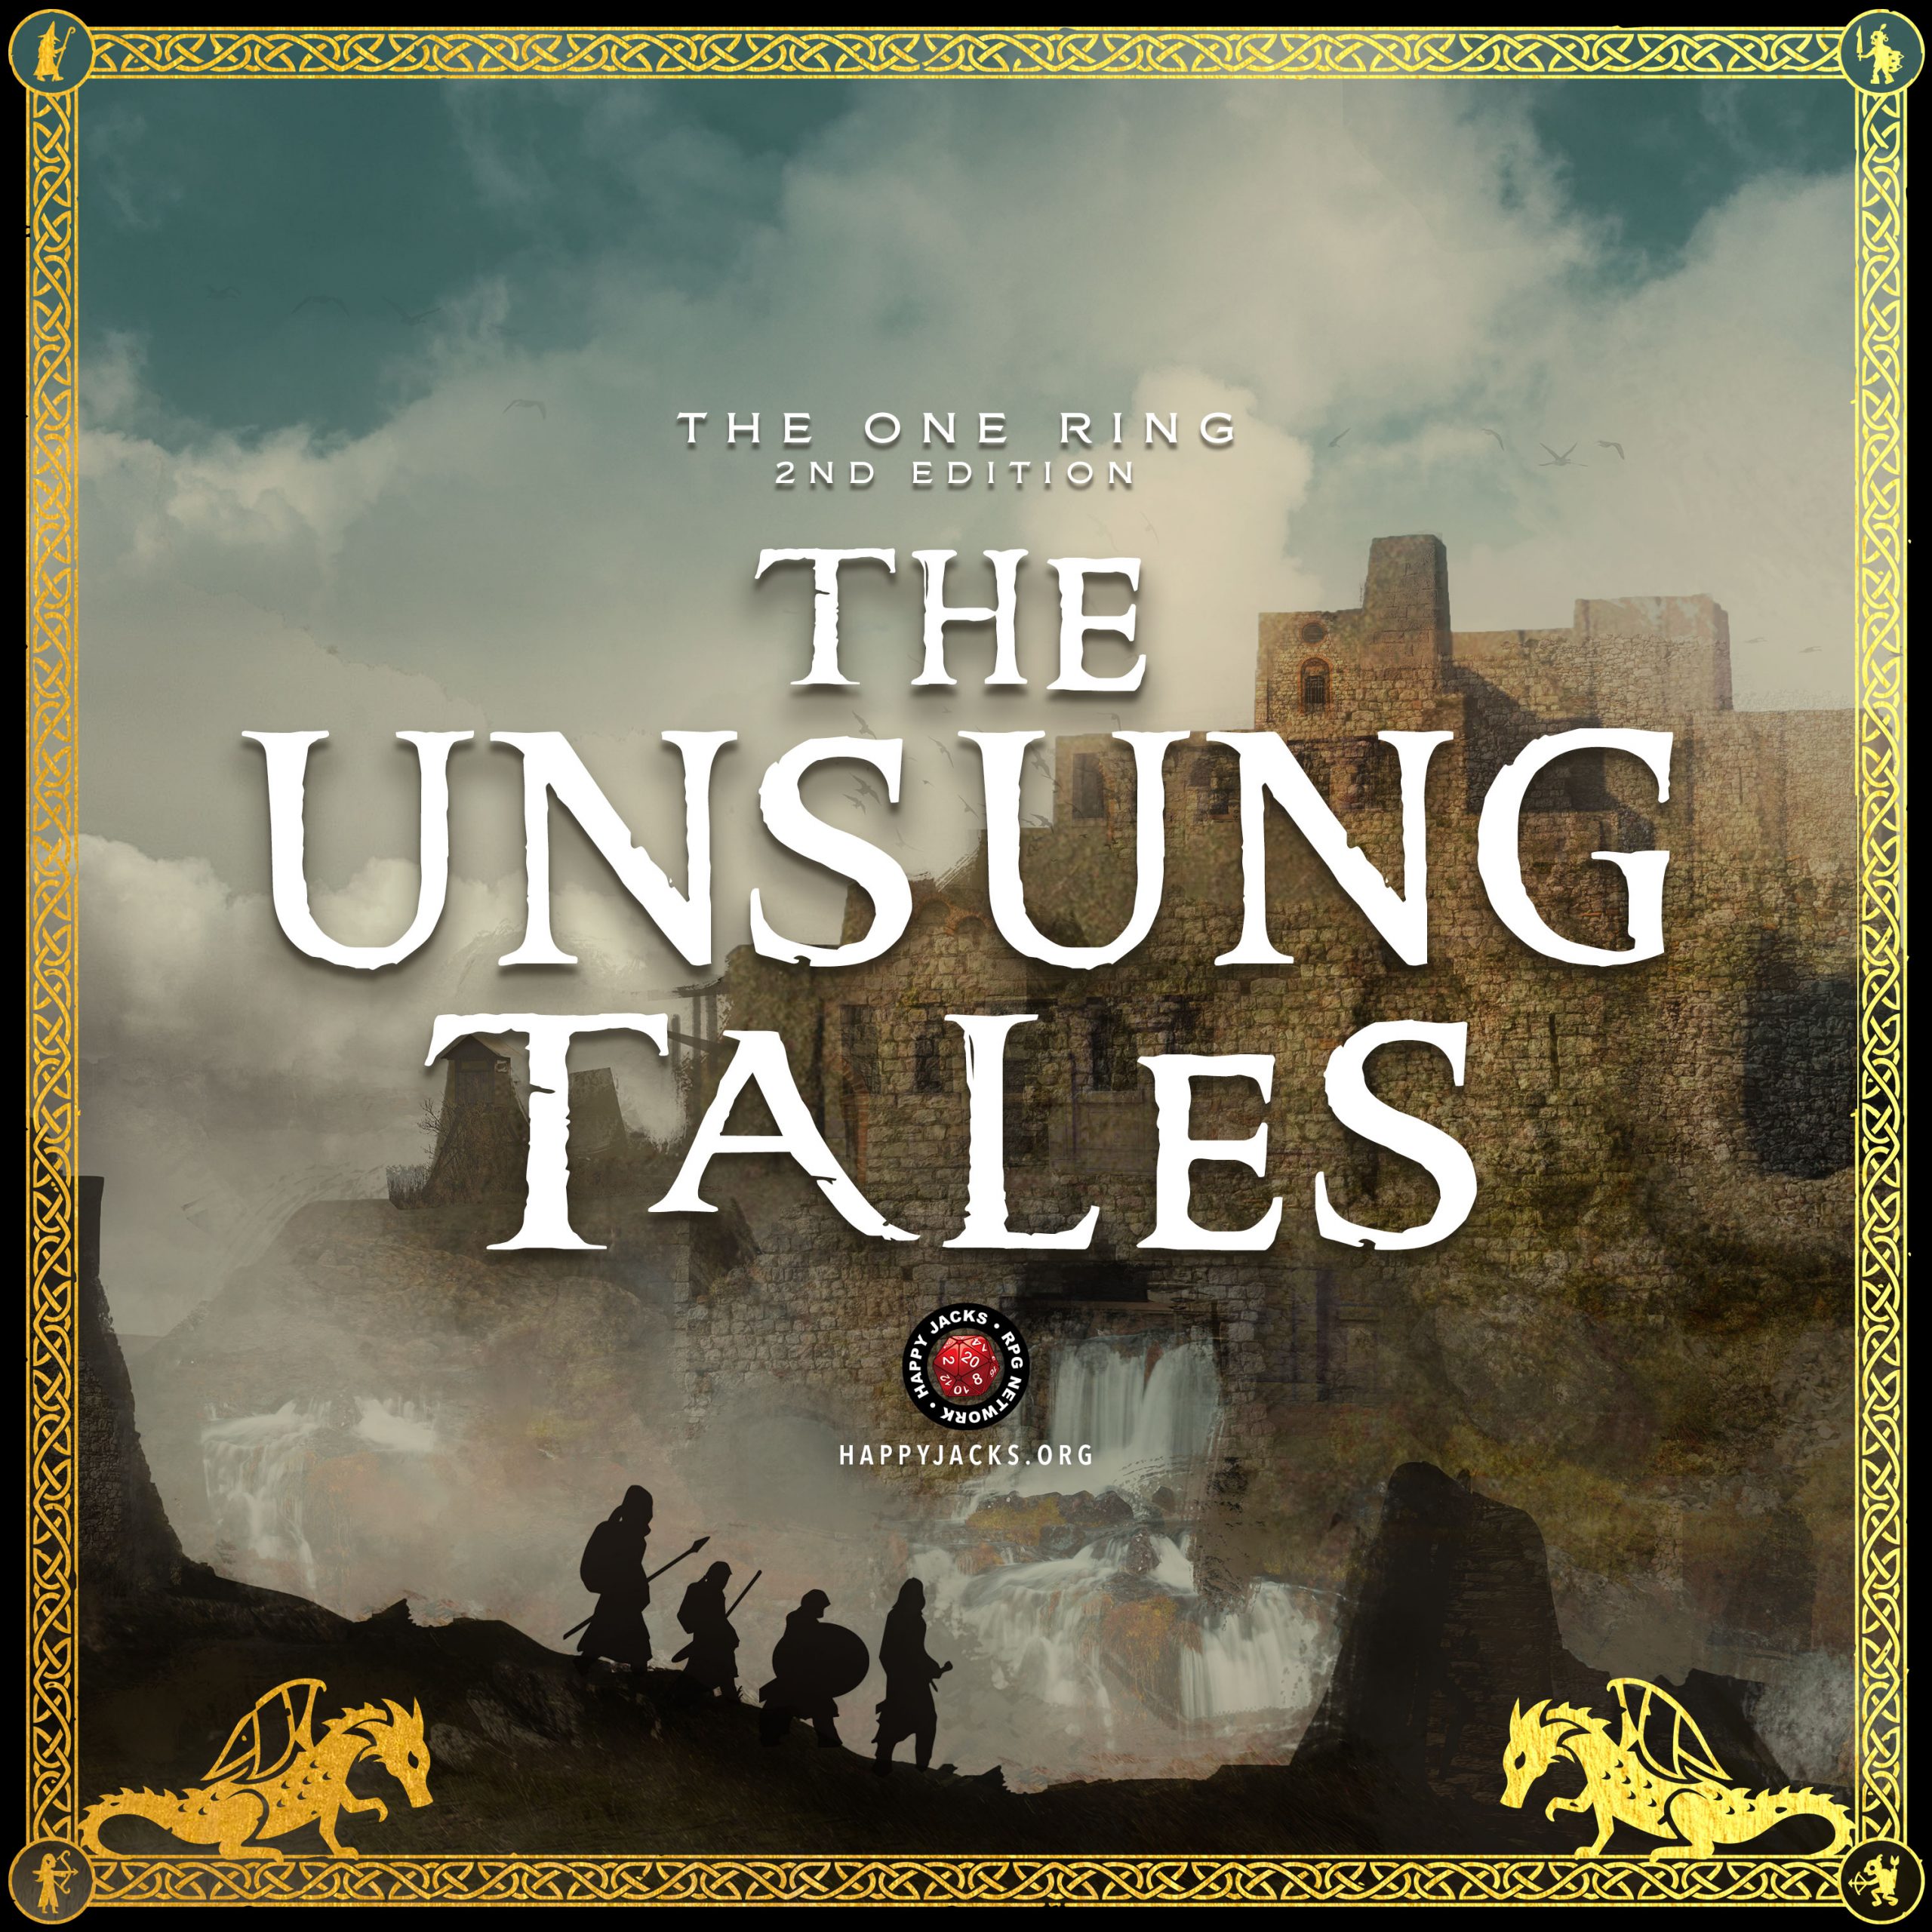 UNSUNG04 The Braggart | The Unsung Tales | The One Ring 2e